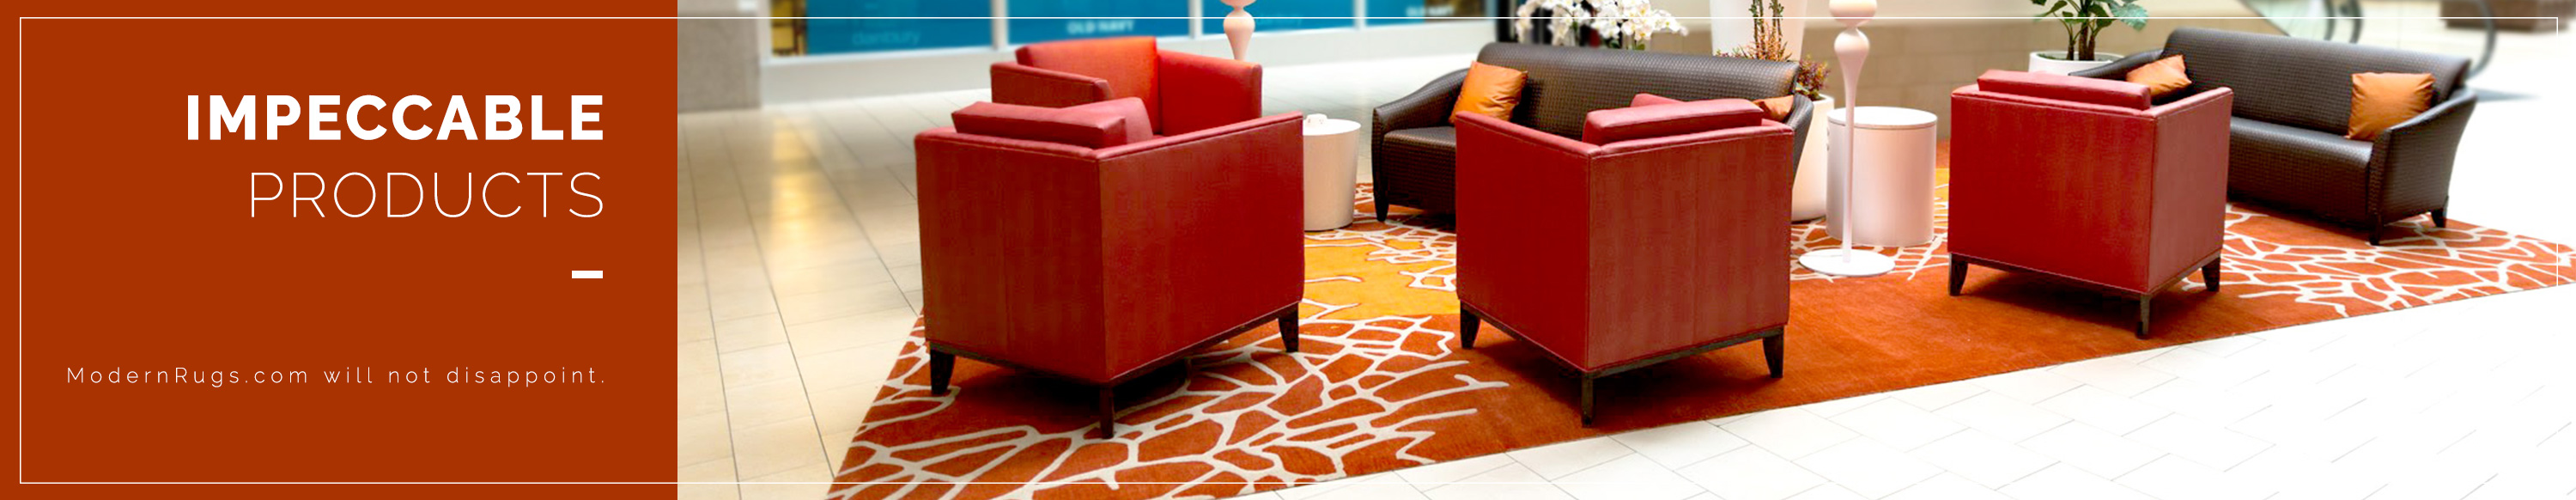 Impeccable products; ModernRugs.com will not disappoint.